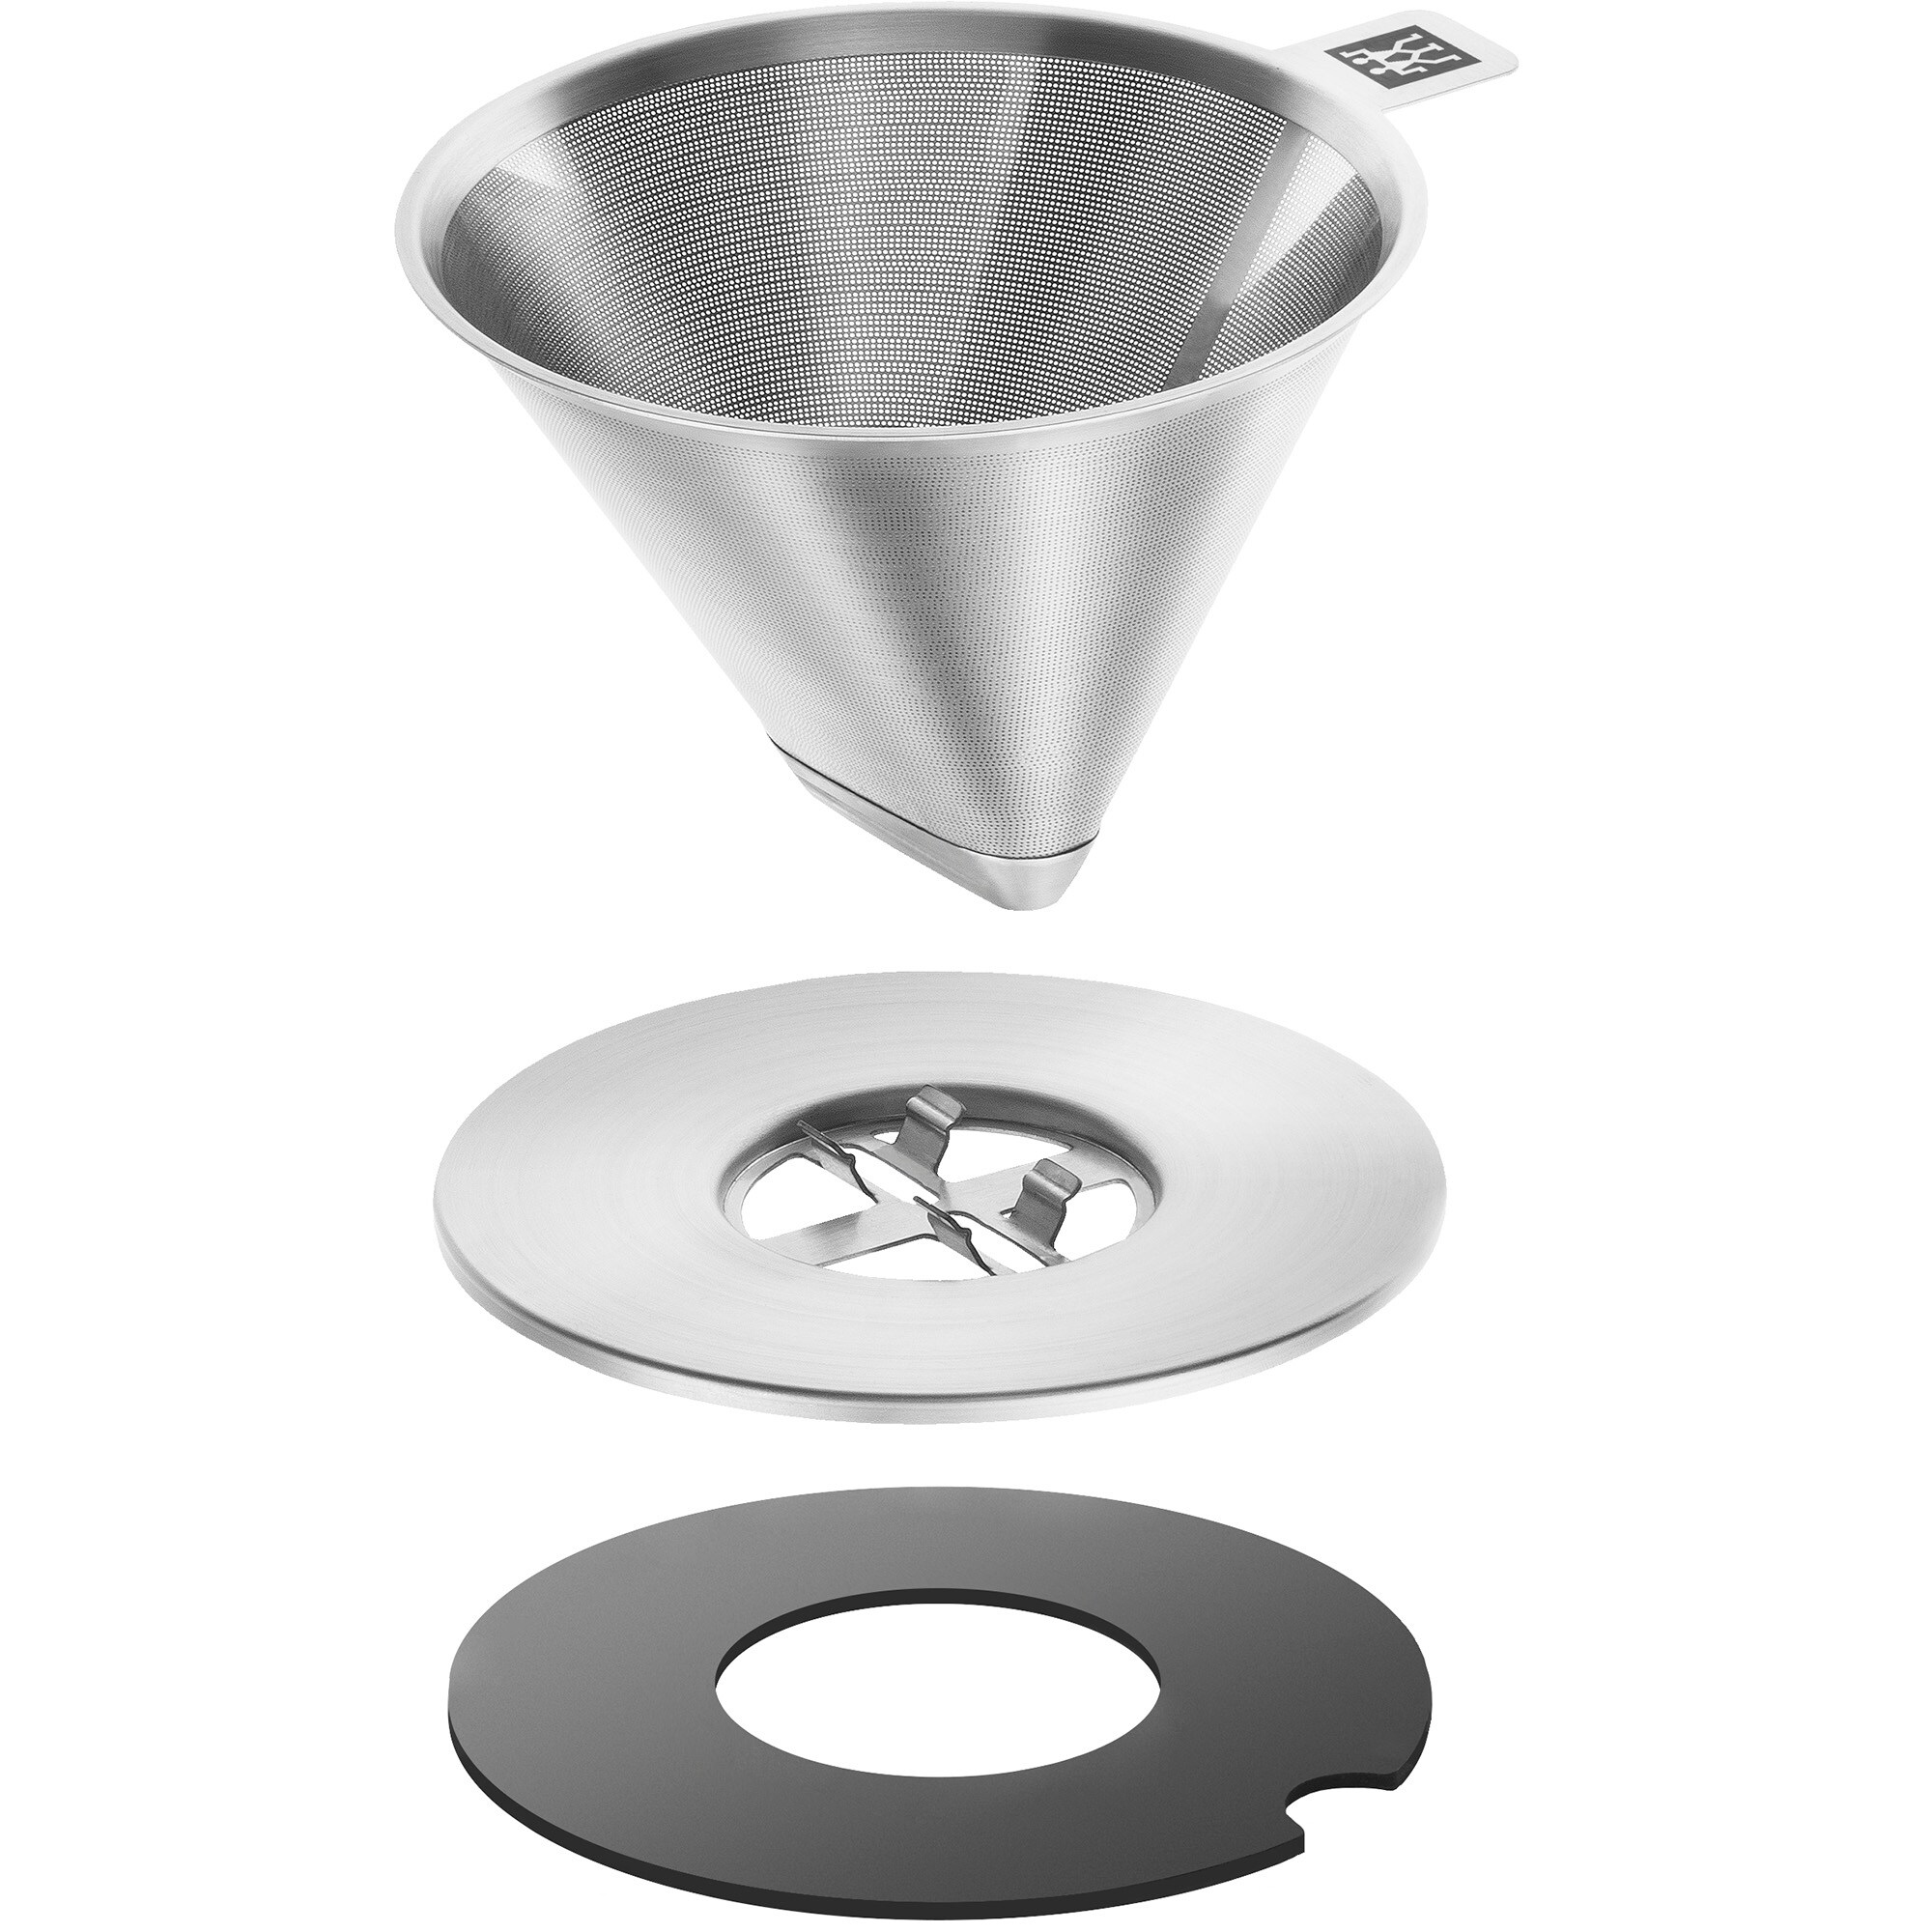 https://ak1.ostkcdn.com/images/products/is/images/direct/5a6585c70734f91a5e5f4a4360a501f4b7ad21c2/ZWILLING-Sorrento-Stainless-Steel-Pour-Over-Coffee-Dripper-with-Double-Wall-Glass-Coffee-Mug.jpg